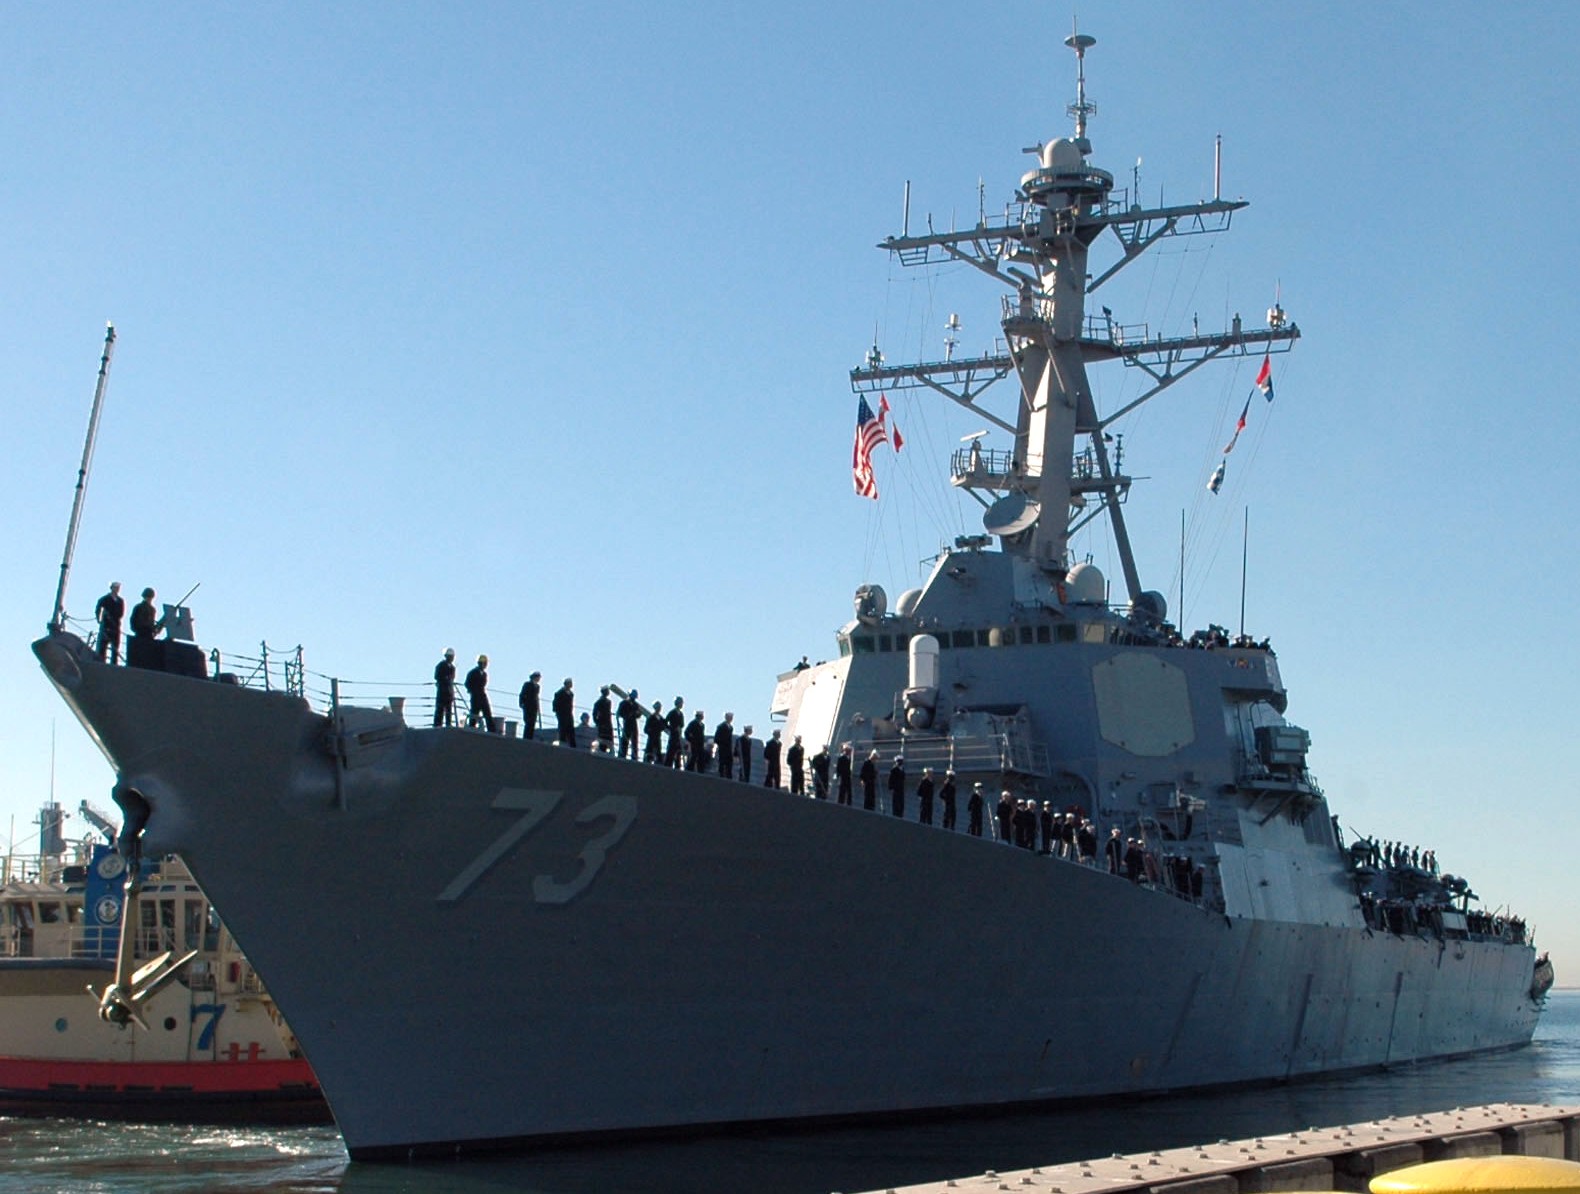 ddg-73 uss decatur guided missile destroyer arleigh burke class aegis bmd 40 naval base san diego